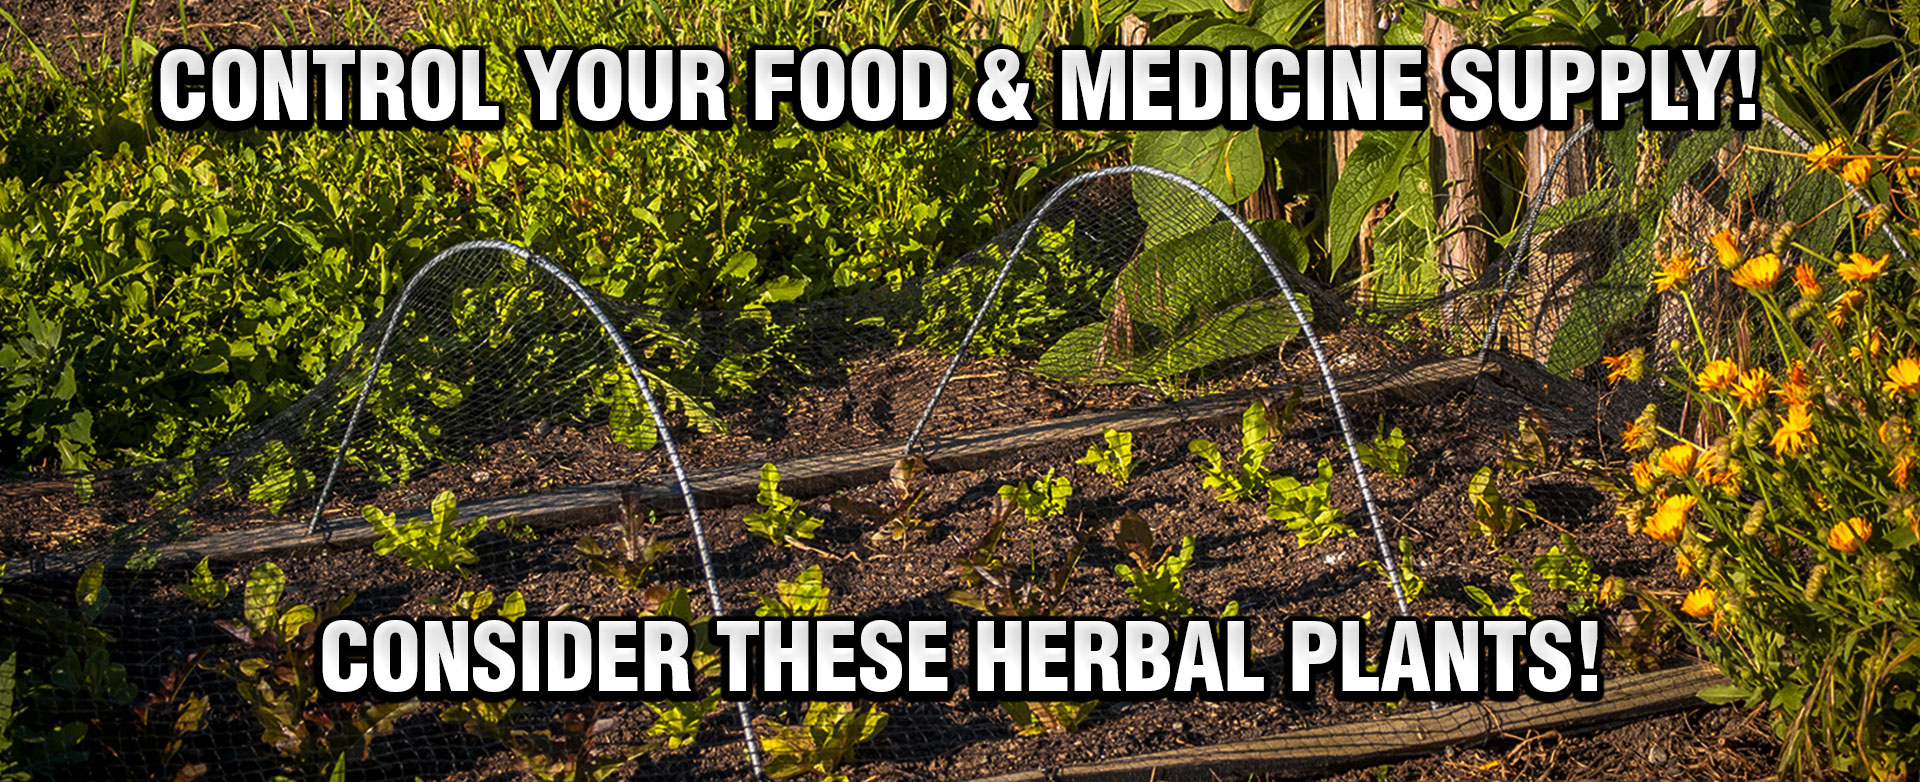 MyPatriotsNetwork-Control Your Food & Medicine Supply! Consider These Herbal Plants For Your Survival Garden